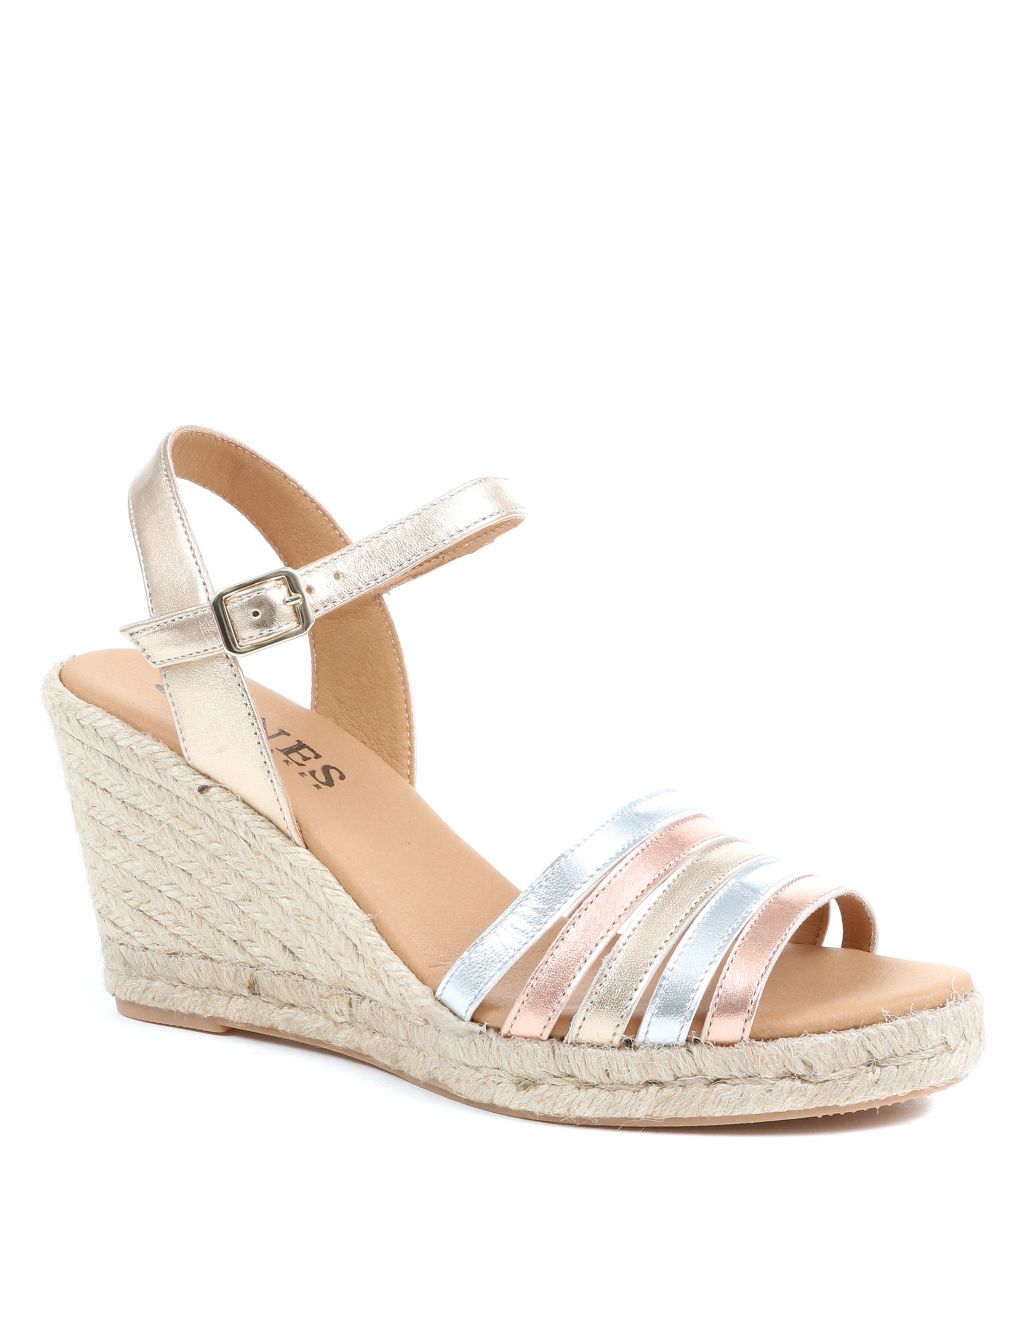 Leather Metallic Ankle Strap Wedge Sandals image 3